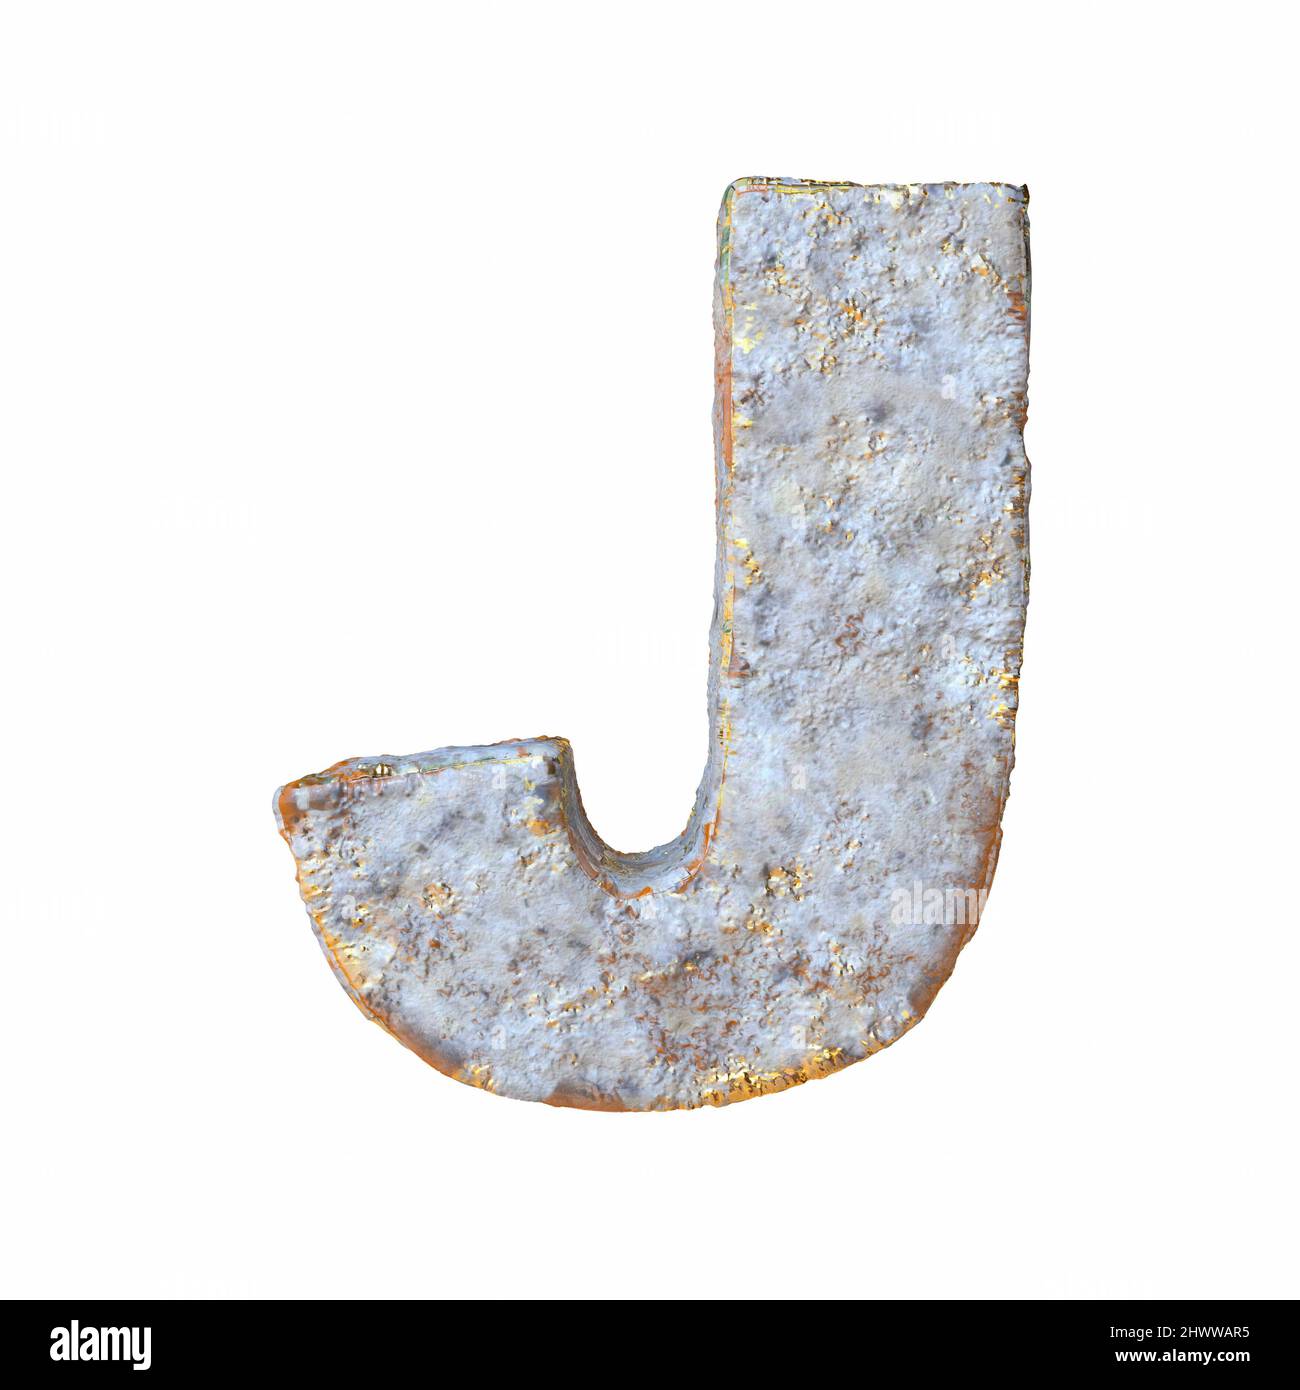 Stone with golden metal particles Letter J 3D rendering illustration isolated on white background Stock Photo